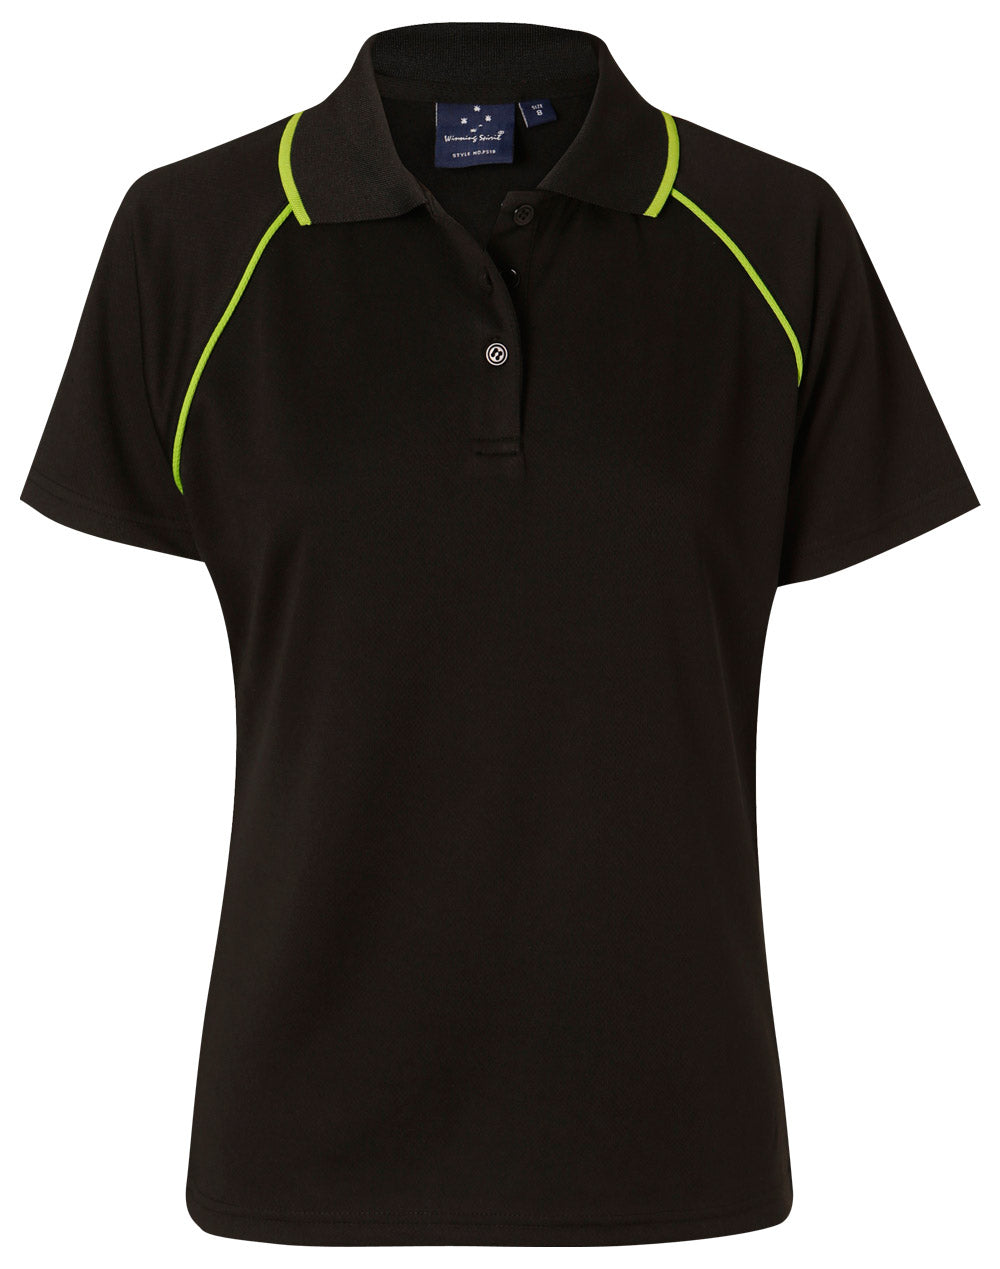 Ladies Cooldry Contrast Polo - made by AIW